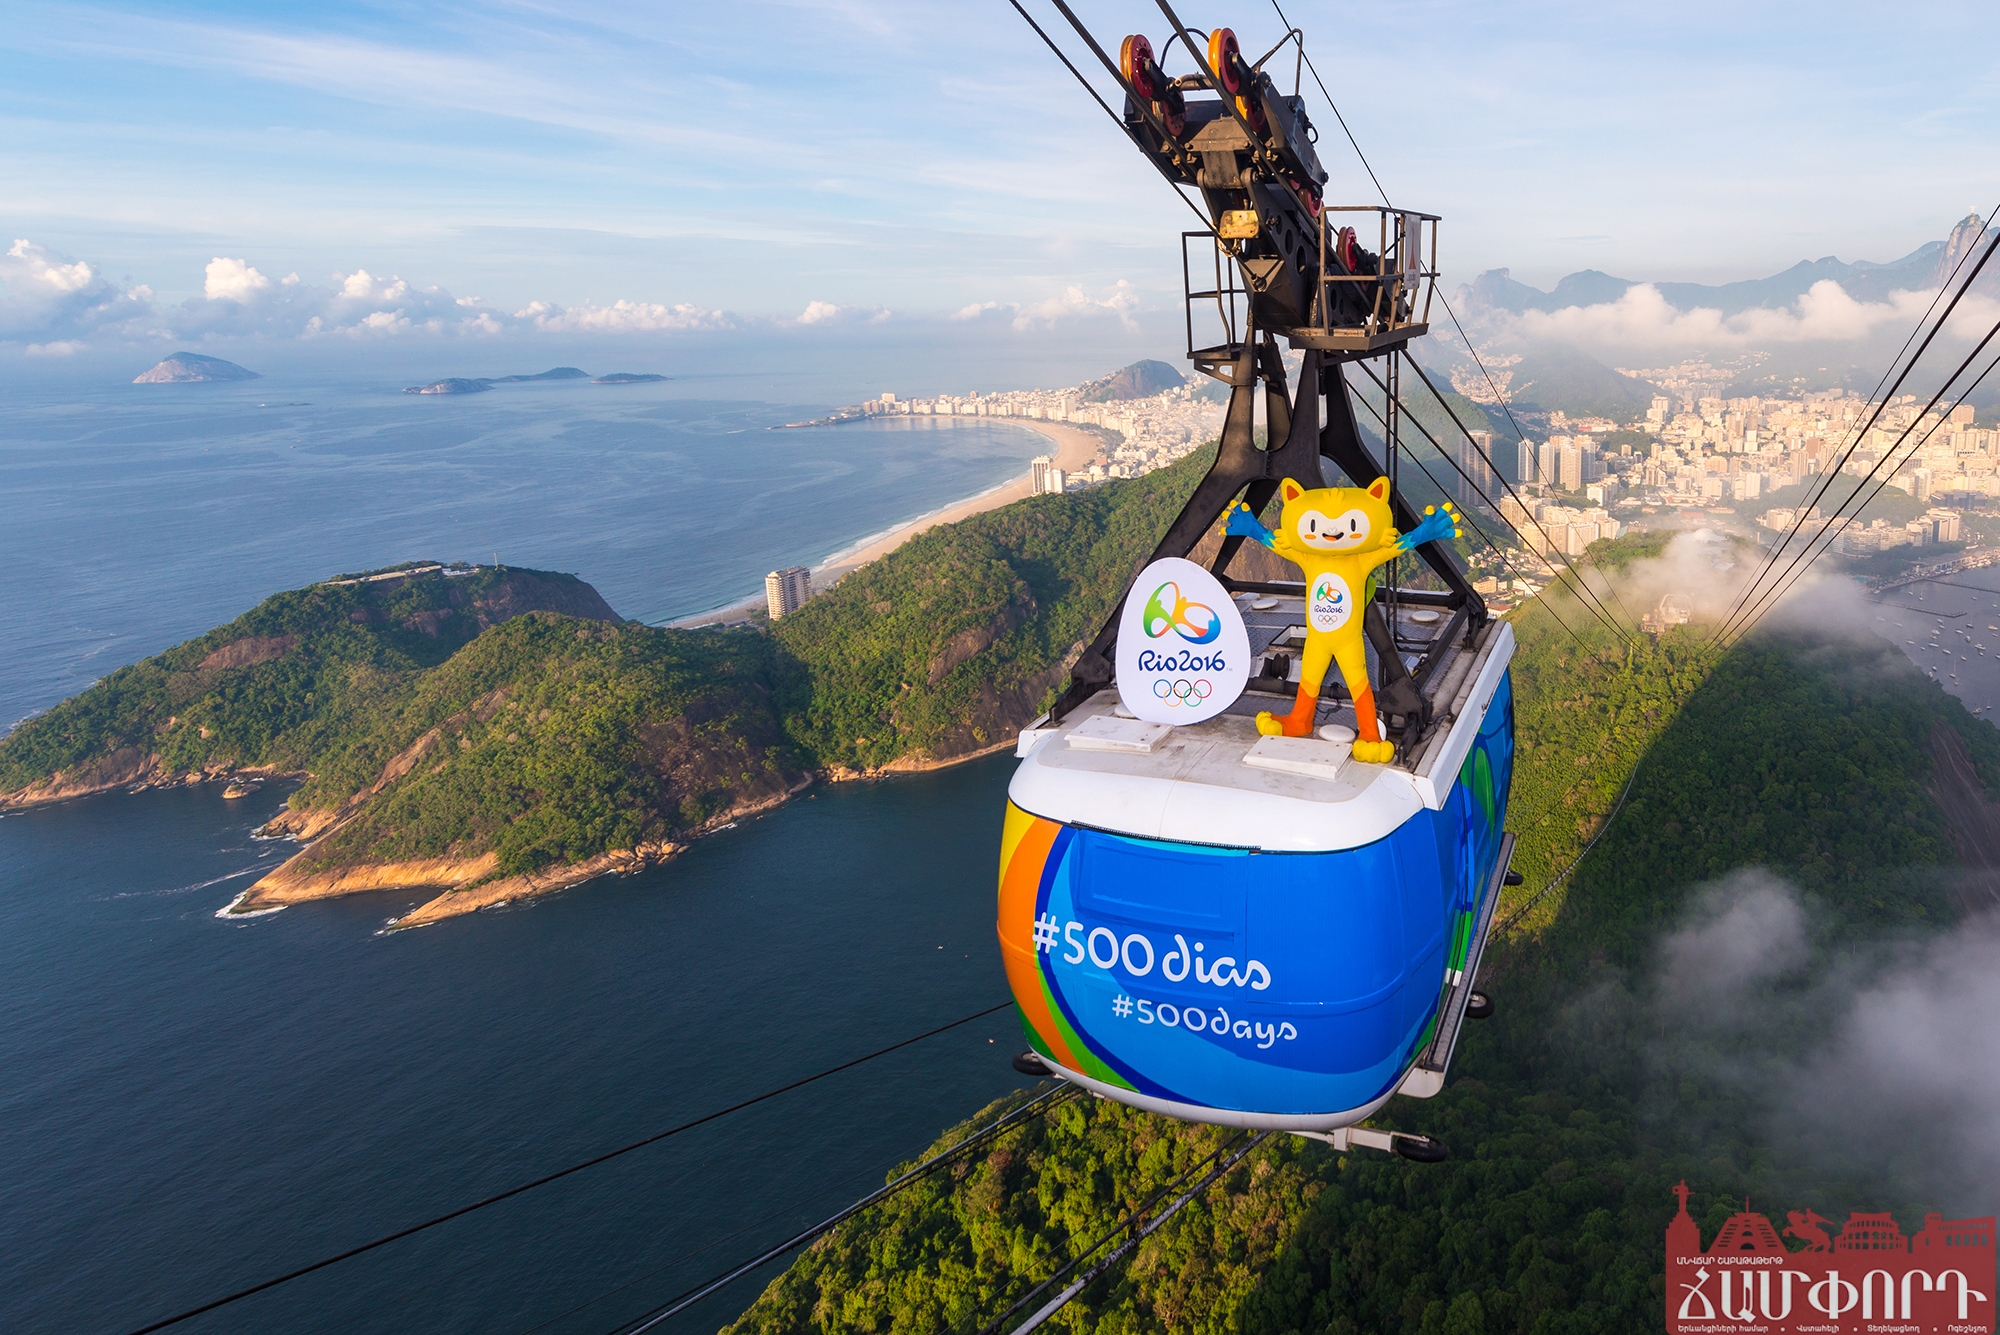 RIO DE JANEIRO, BRAZIL - MARCH 23:   In this handout image provided by Rio 2016,  Olympic mascot, Vinicius, rides  from the top of the Sugarloaf cable on March 23, 2015 in Rio De Janeiro, Brazil. Rio de Janeiro celebrates 500 days to go until the Rio 2016 Olympic Games, the first to be staged in South America  (Photo by Alex Ferro/Rio 2016 via Getty Images)